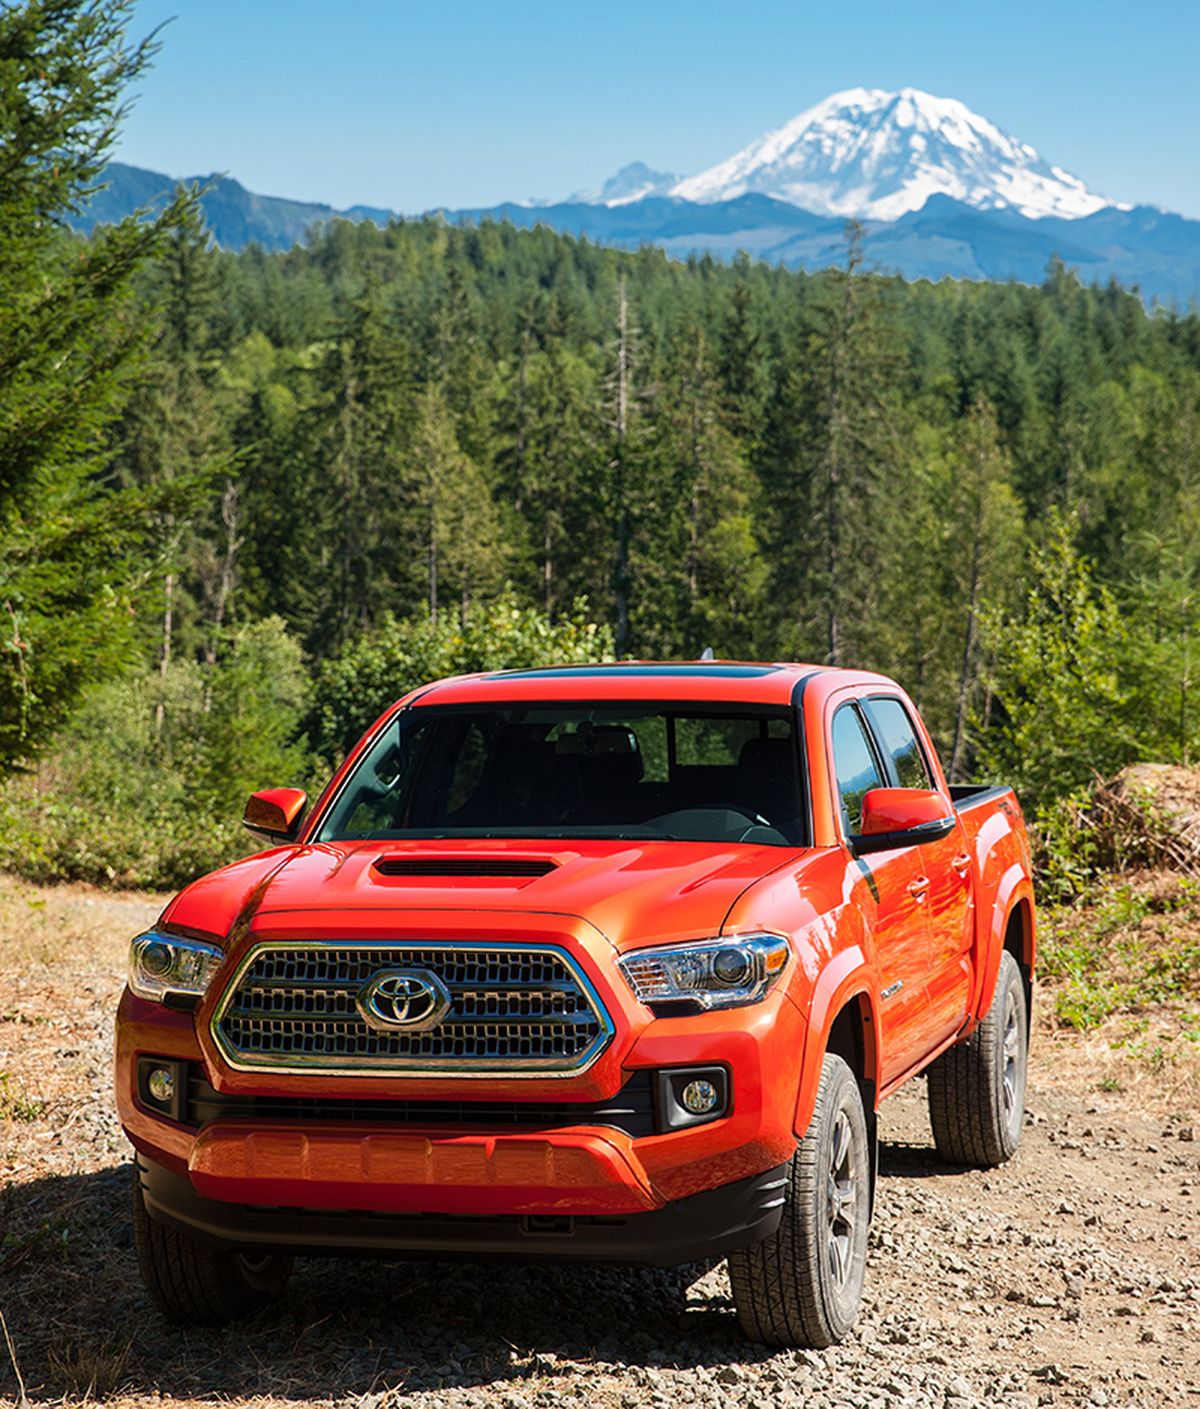 Toyota wanted to impress the media with the off-road abilities of the 2016 Tacoma pickup, so it built a mountainside test track just outside Snoqualmie. Mt. Rainier looms in the background. (Toyota)